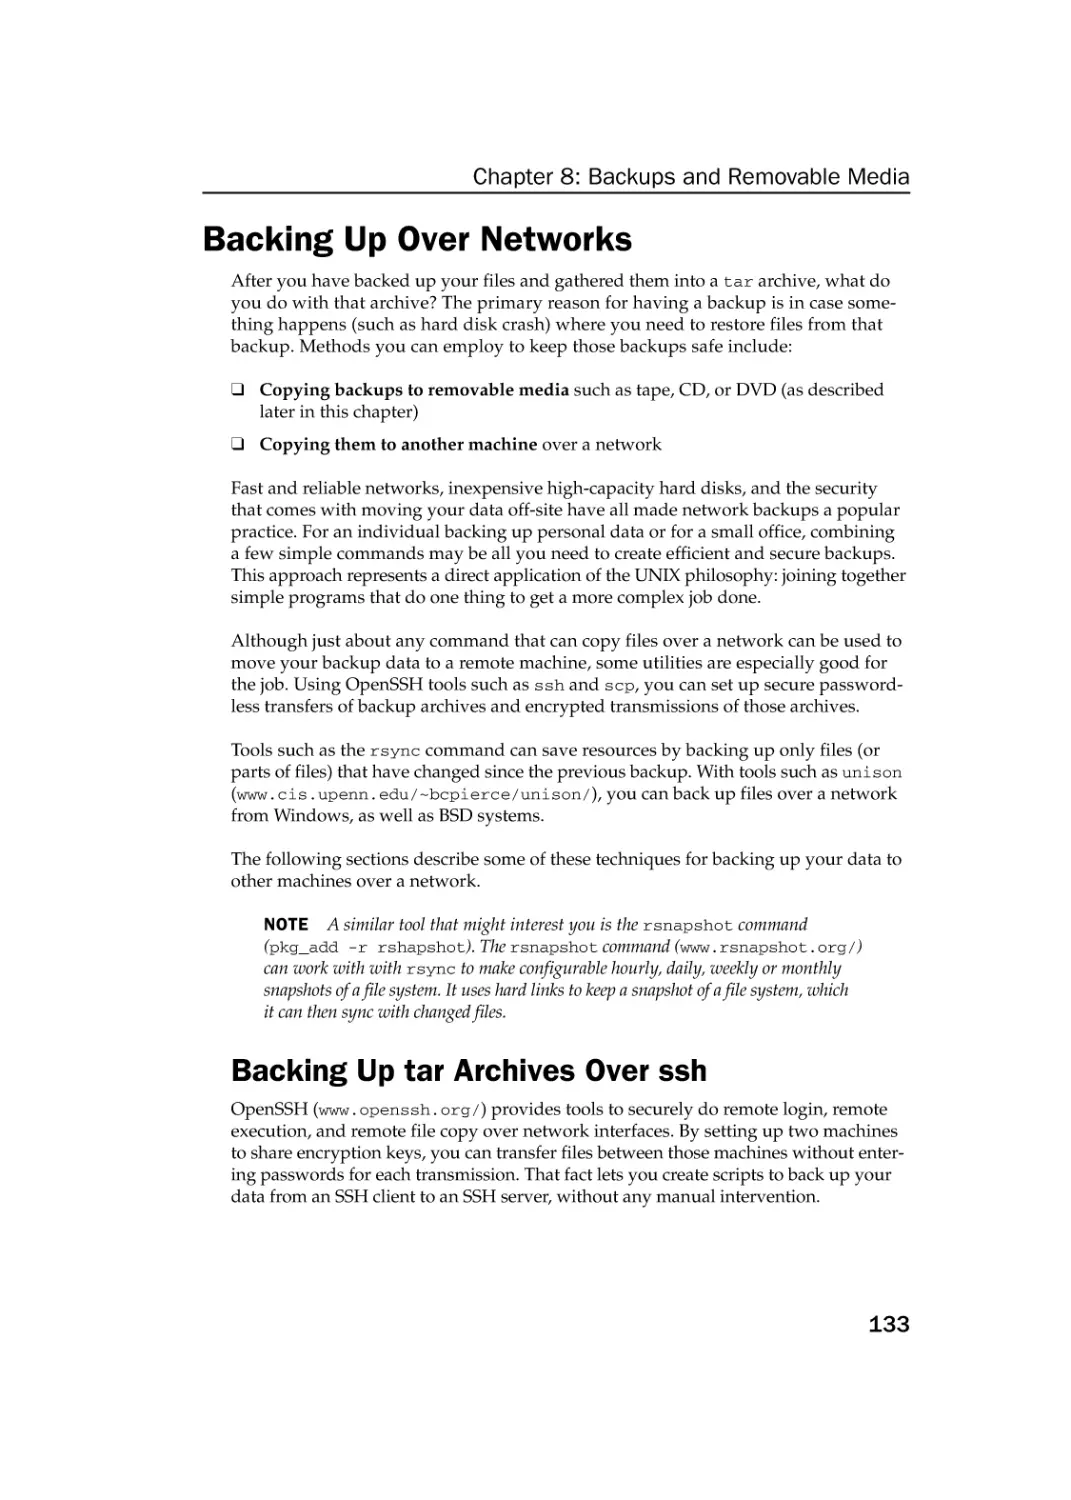 Backing Up Over Networks